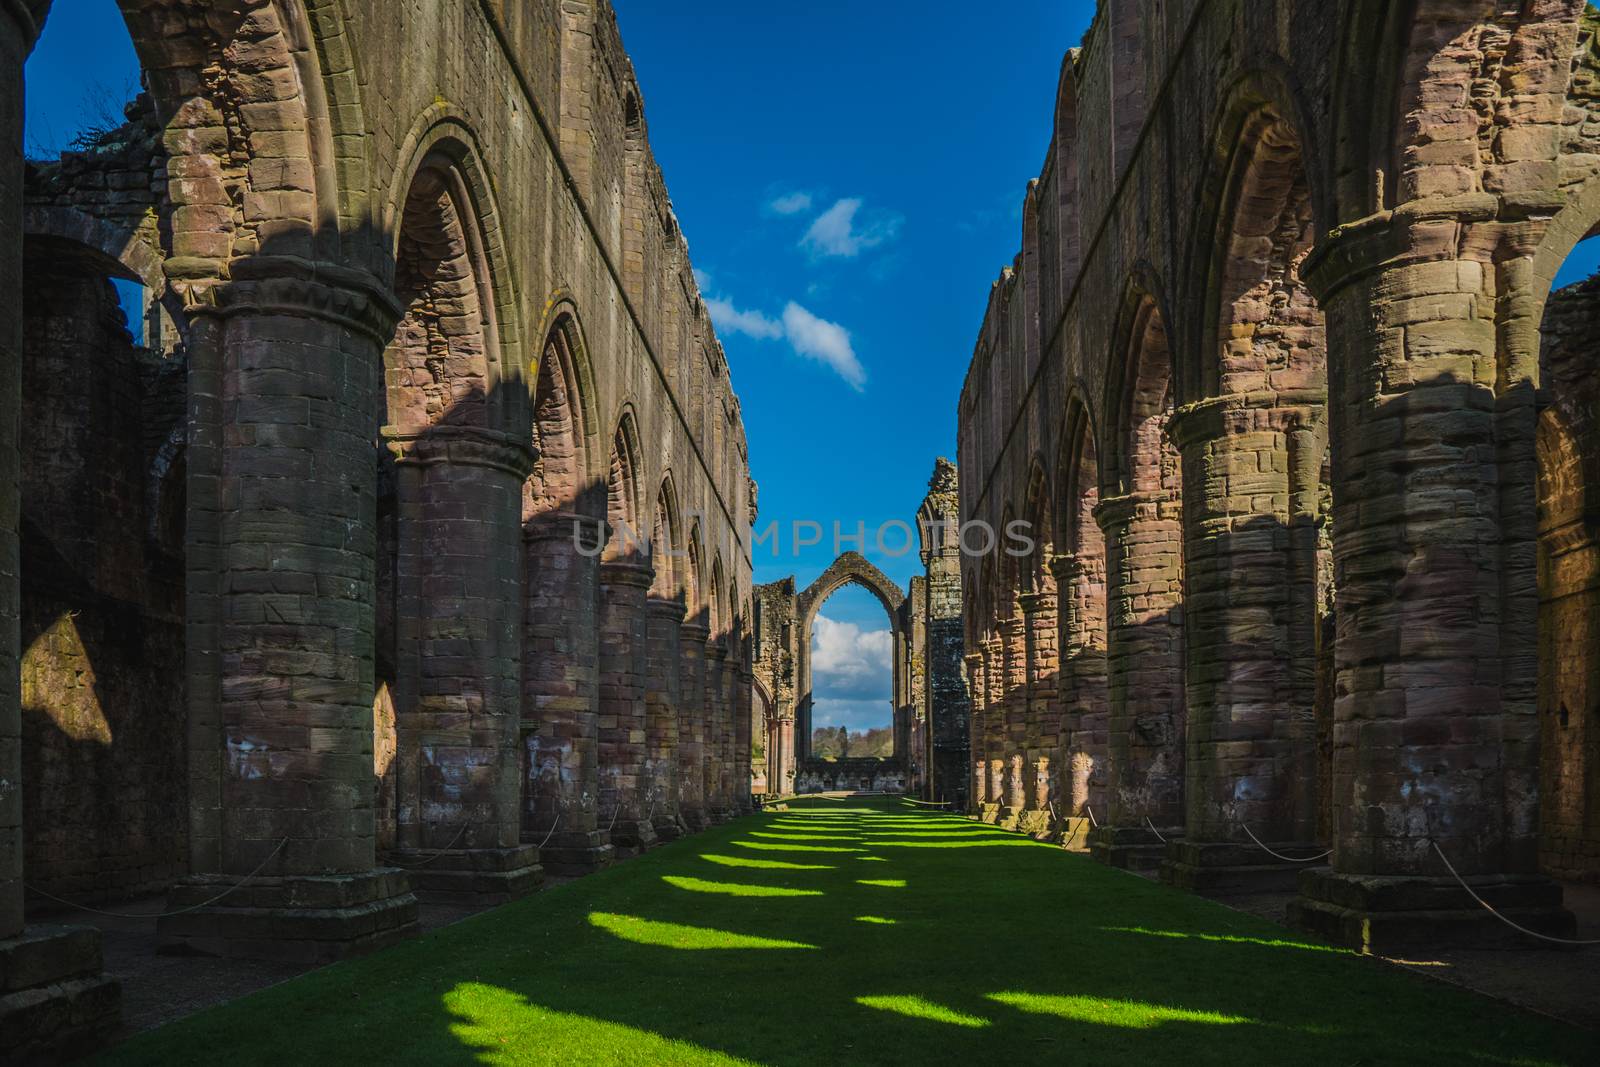 Abbey in Yorkshire by samULvisuals